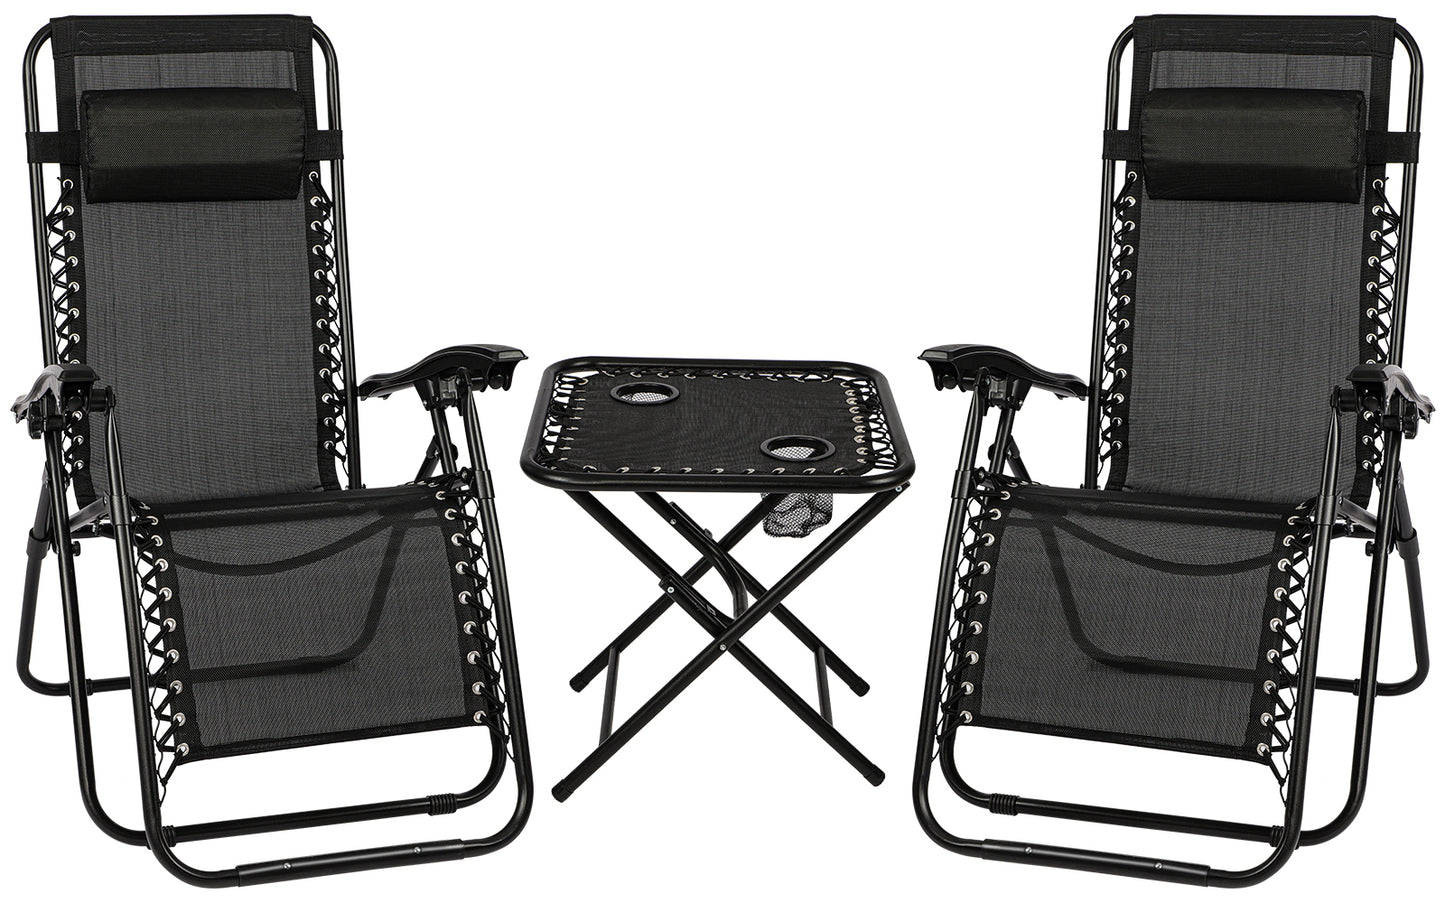 2 x Anti Gravity Chairs & Side Table - Black